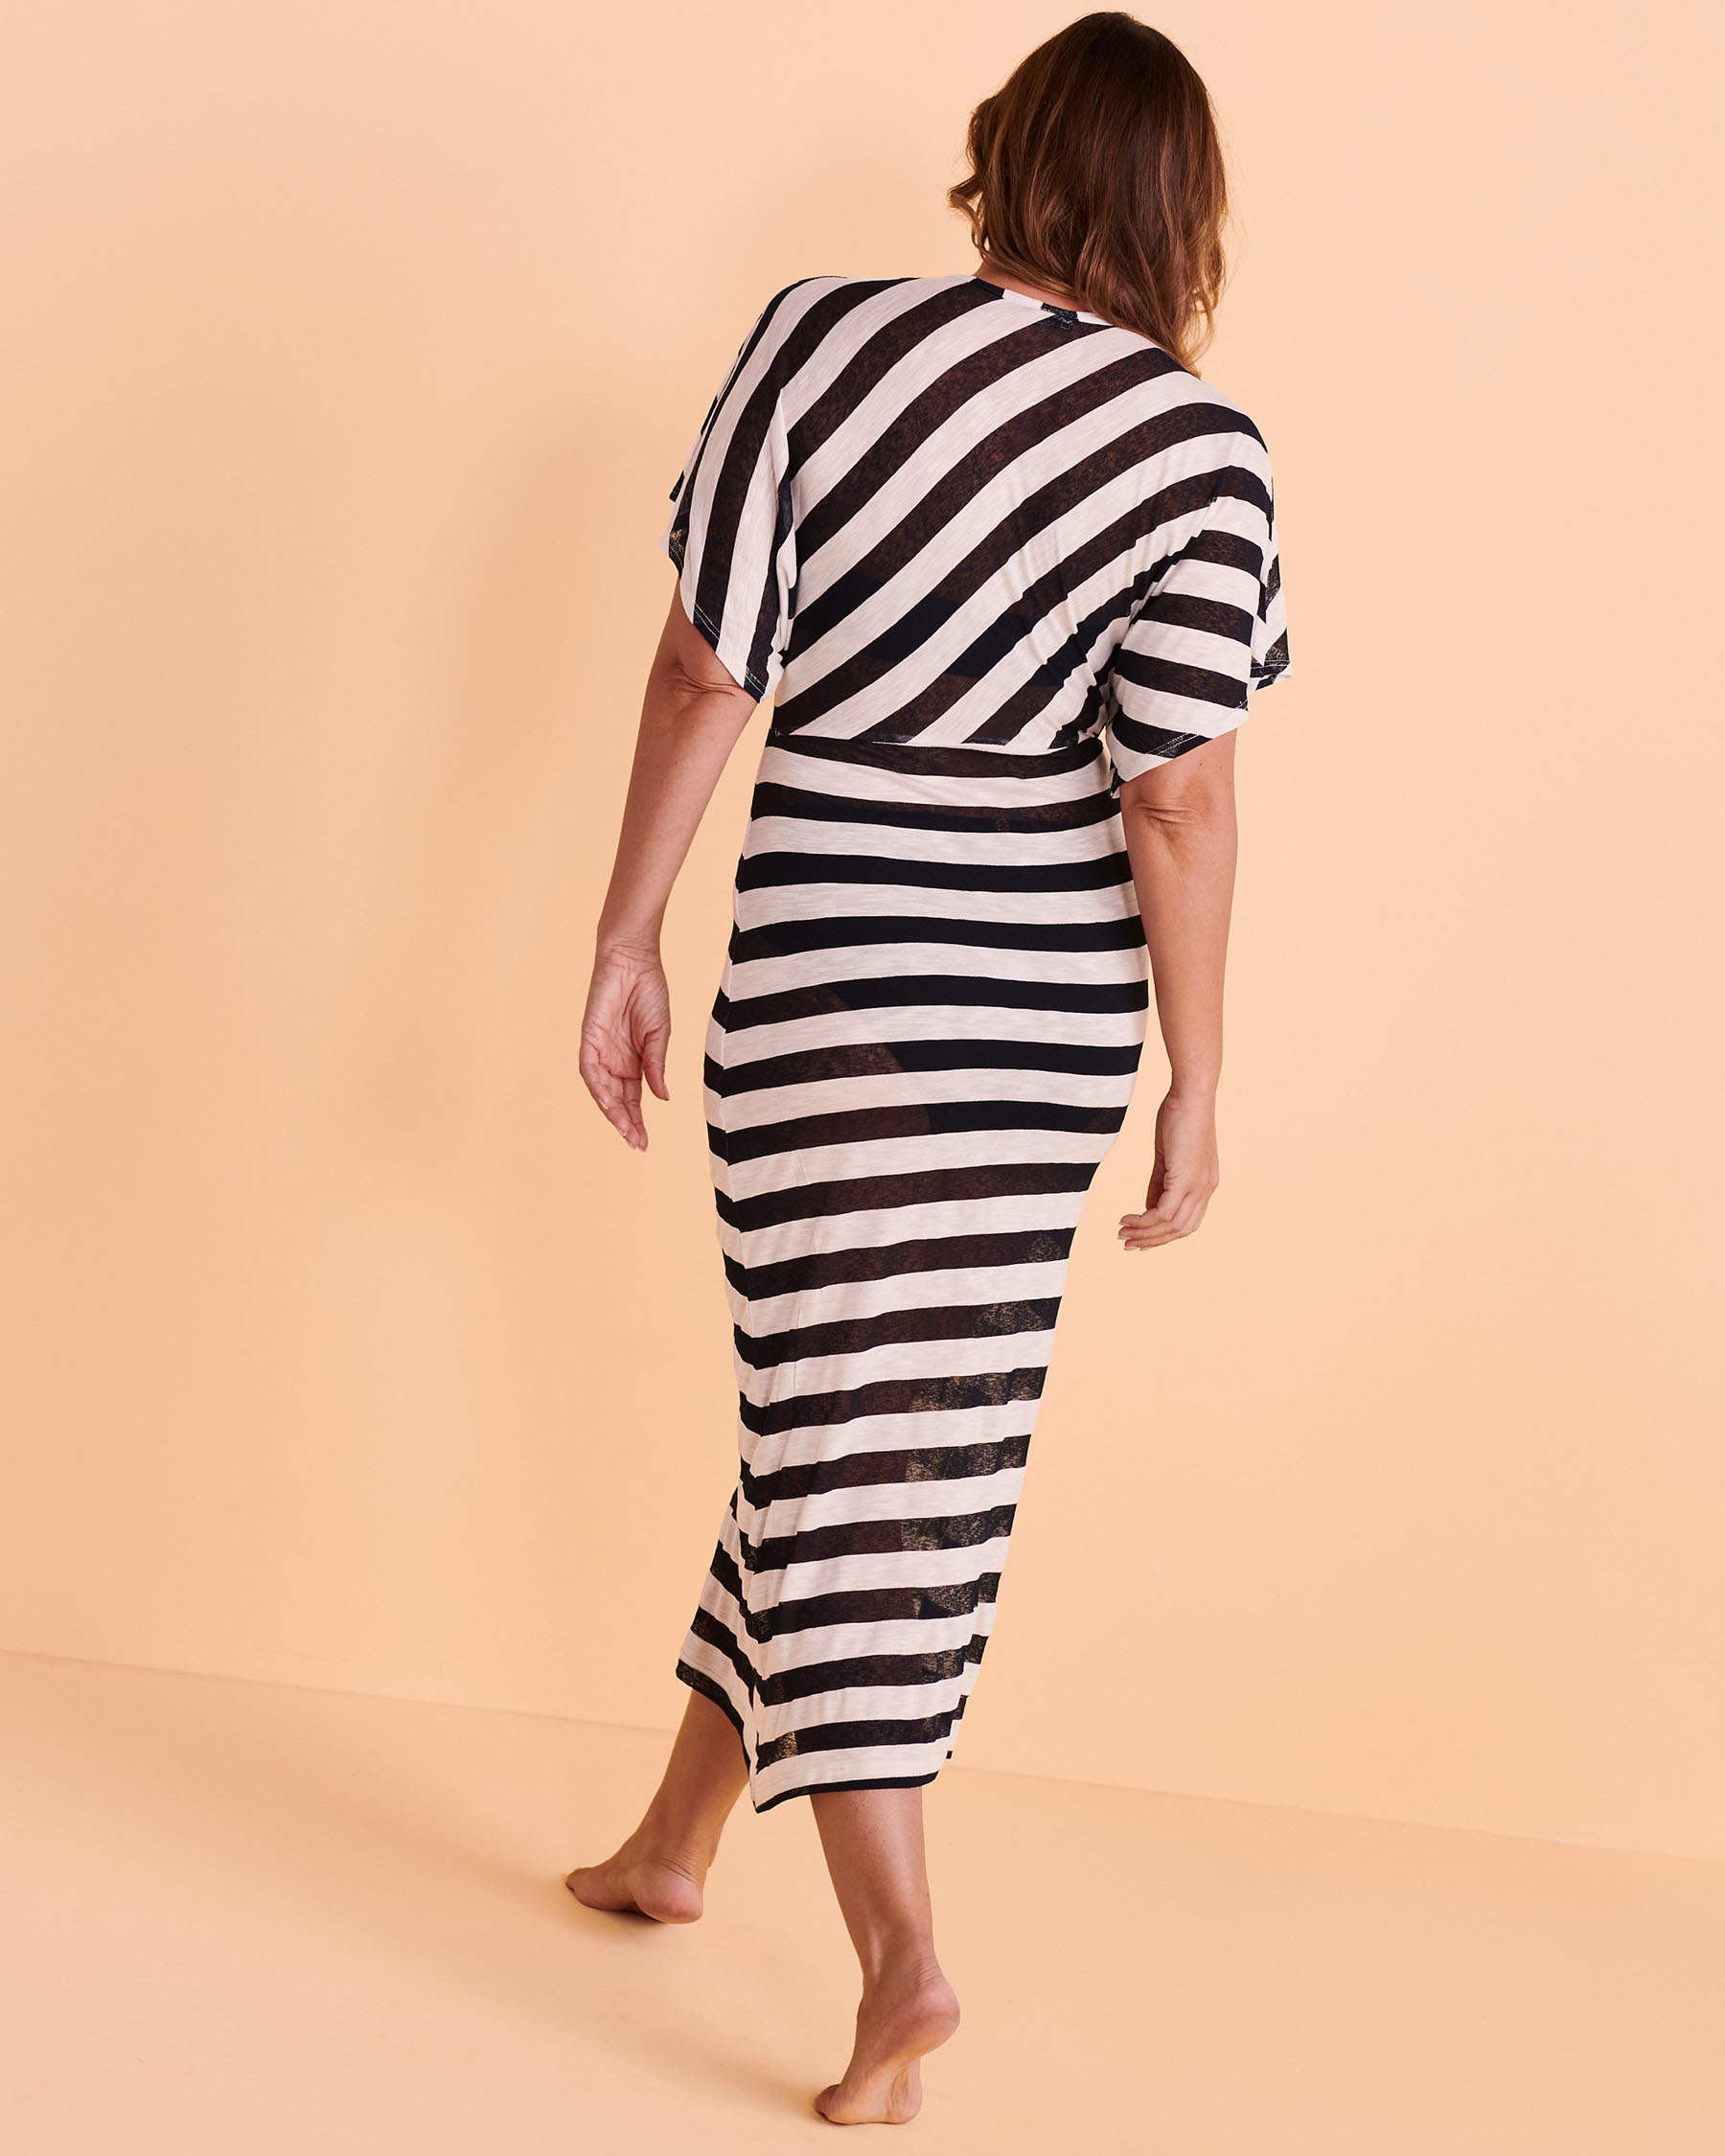 COVER ME Soft Jersey Maxi Dress Stripes 23028765 - View2